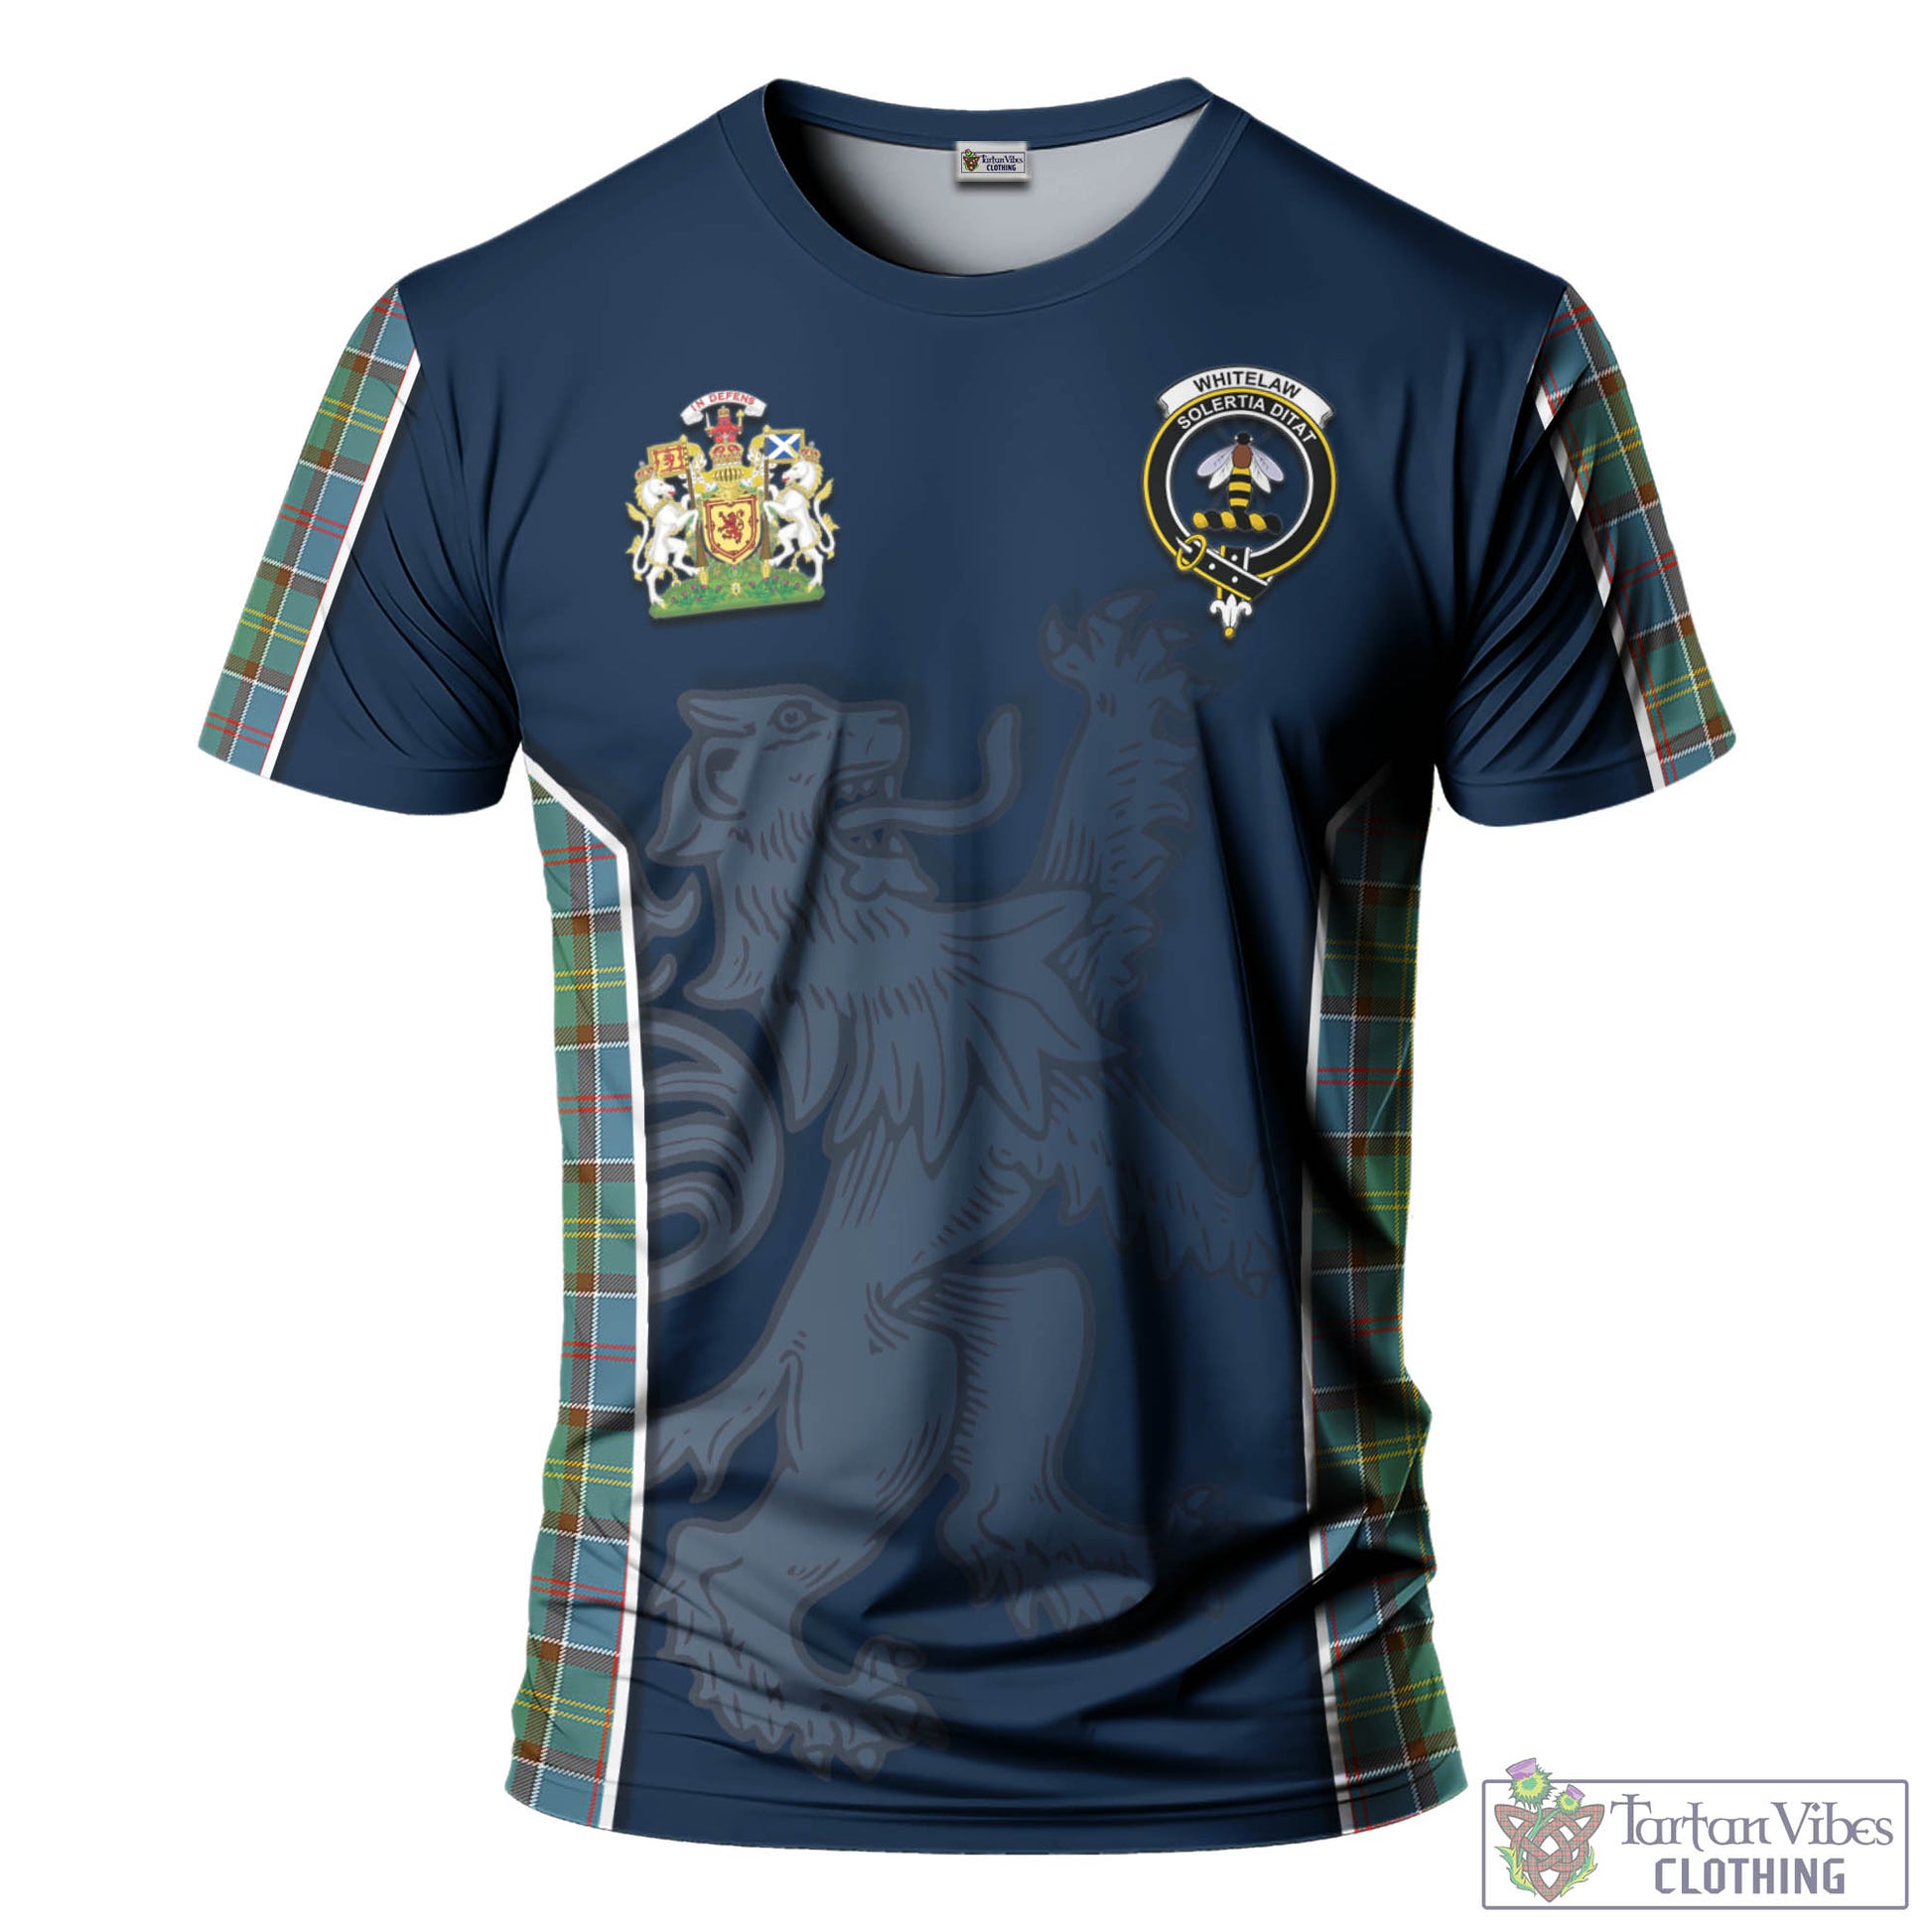 Tartan Vibes Clothing Whitelaw Tartan T-Shirt with Family Crest and Lion Rampant Vibes Sport Style